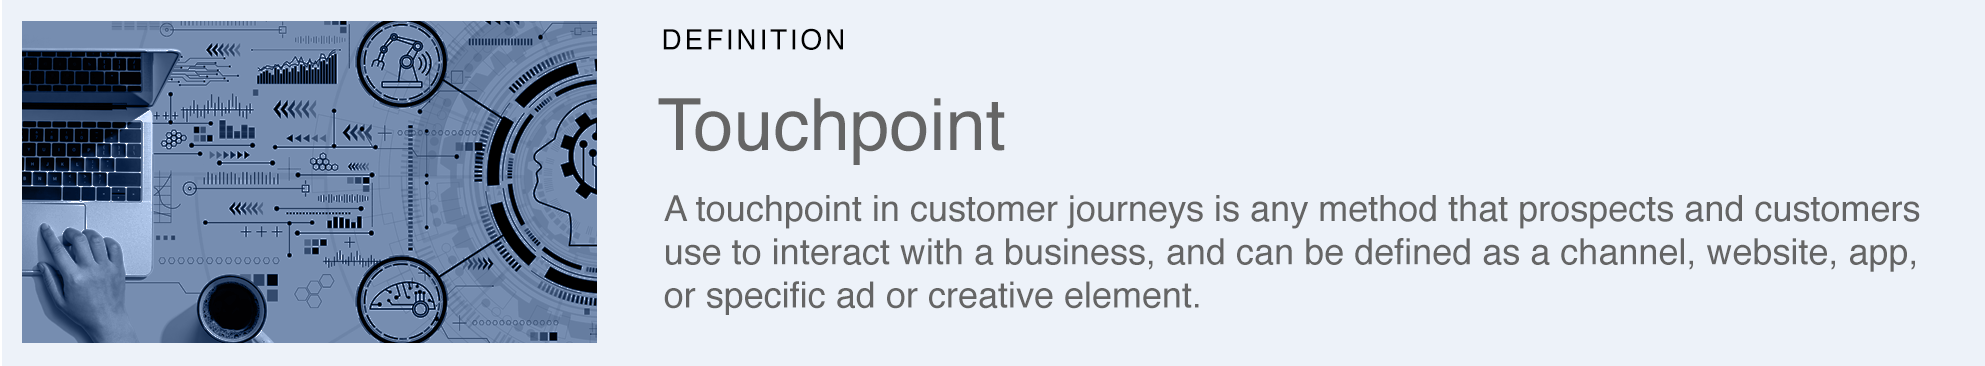 Definition_Touchpoint